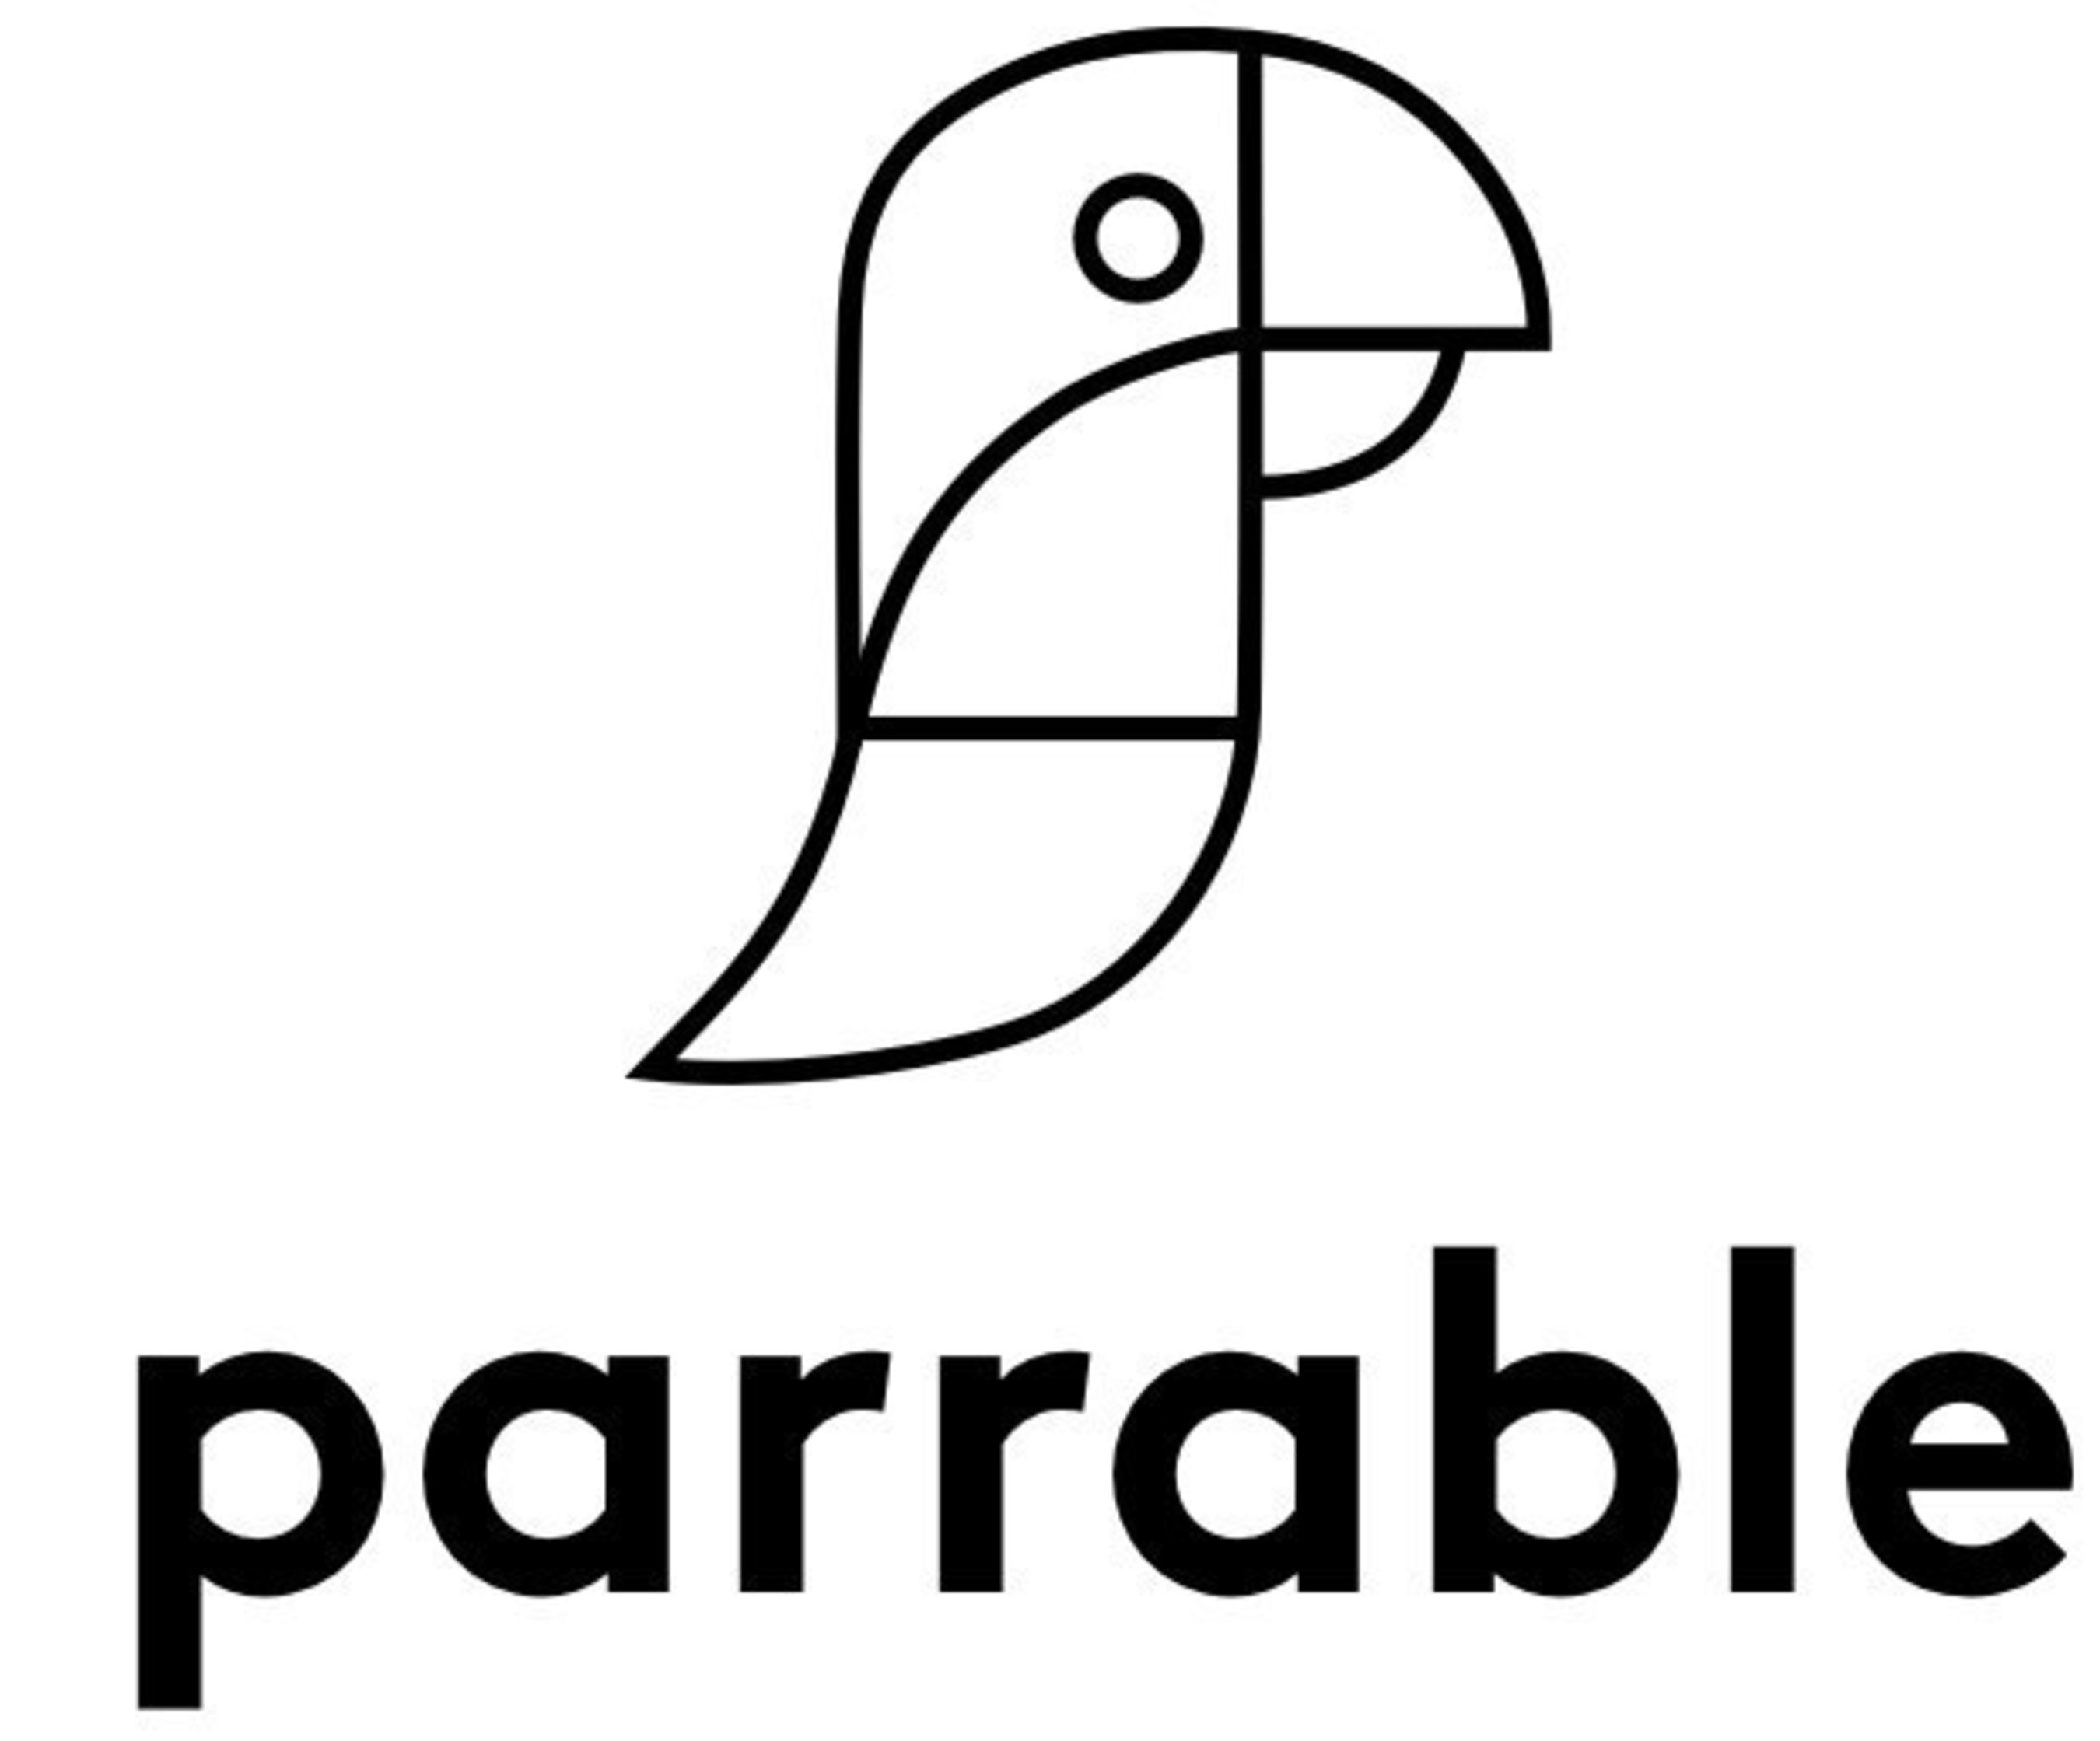 Parrable is a technology company that provides a next-generation digital identification platform for the digital advertising ecosystem.